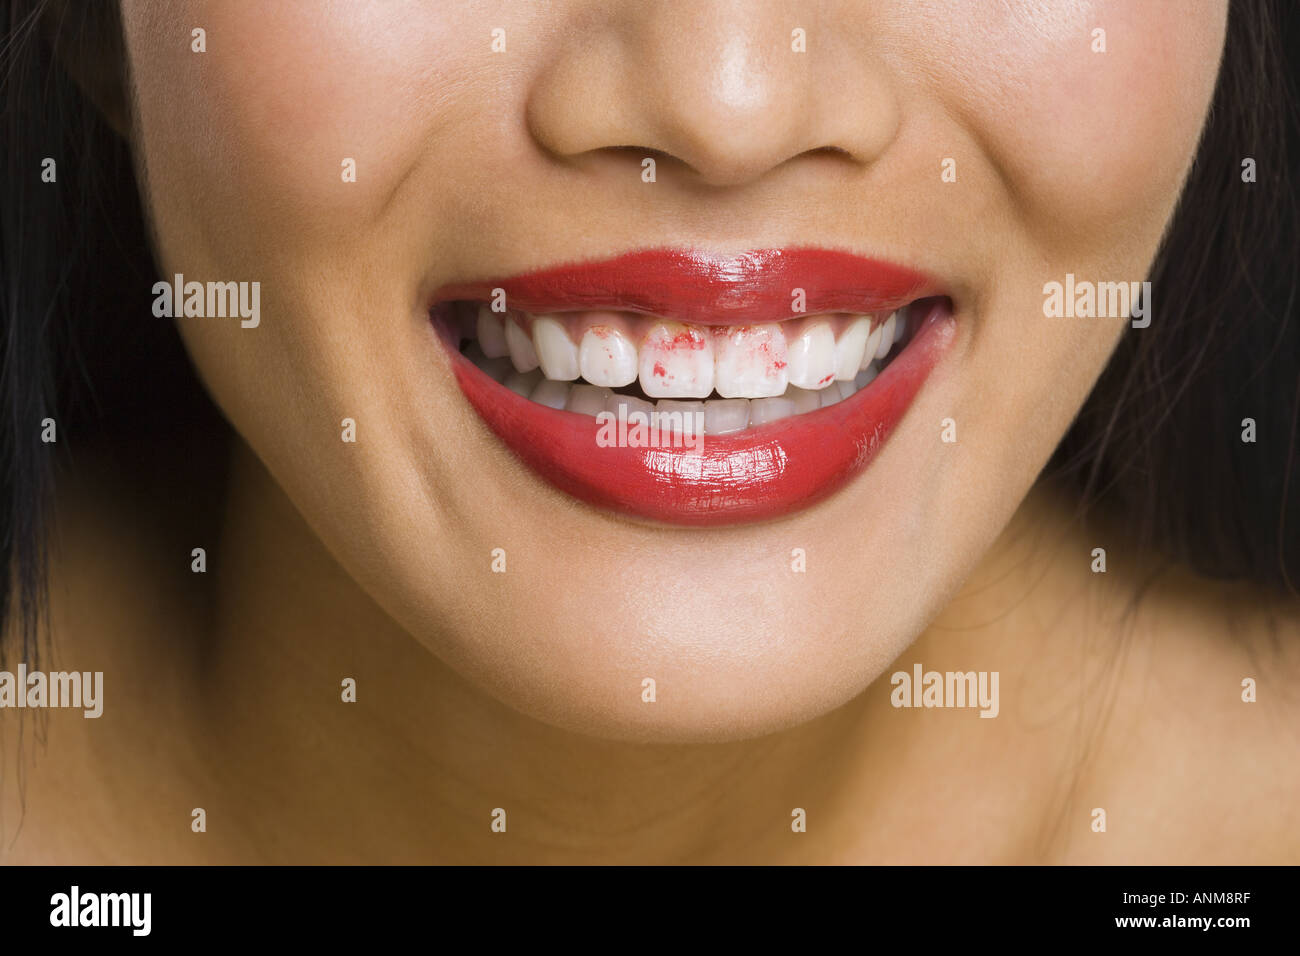 Close up of a woman s lips with lipstick on her teeth Stock Photo